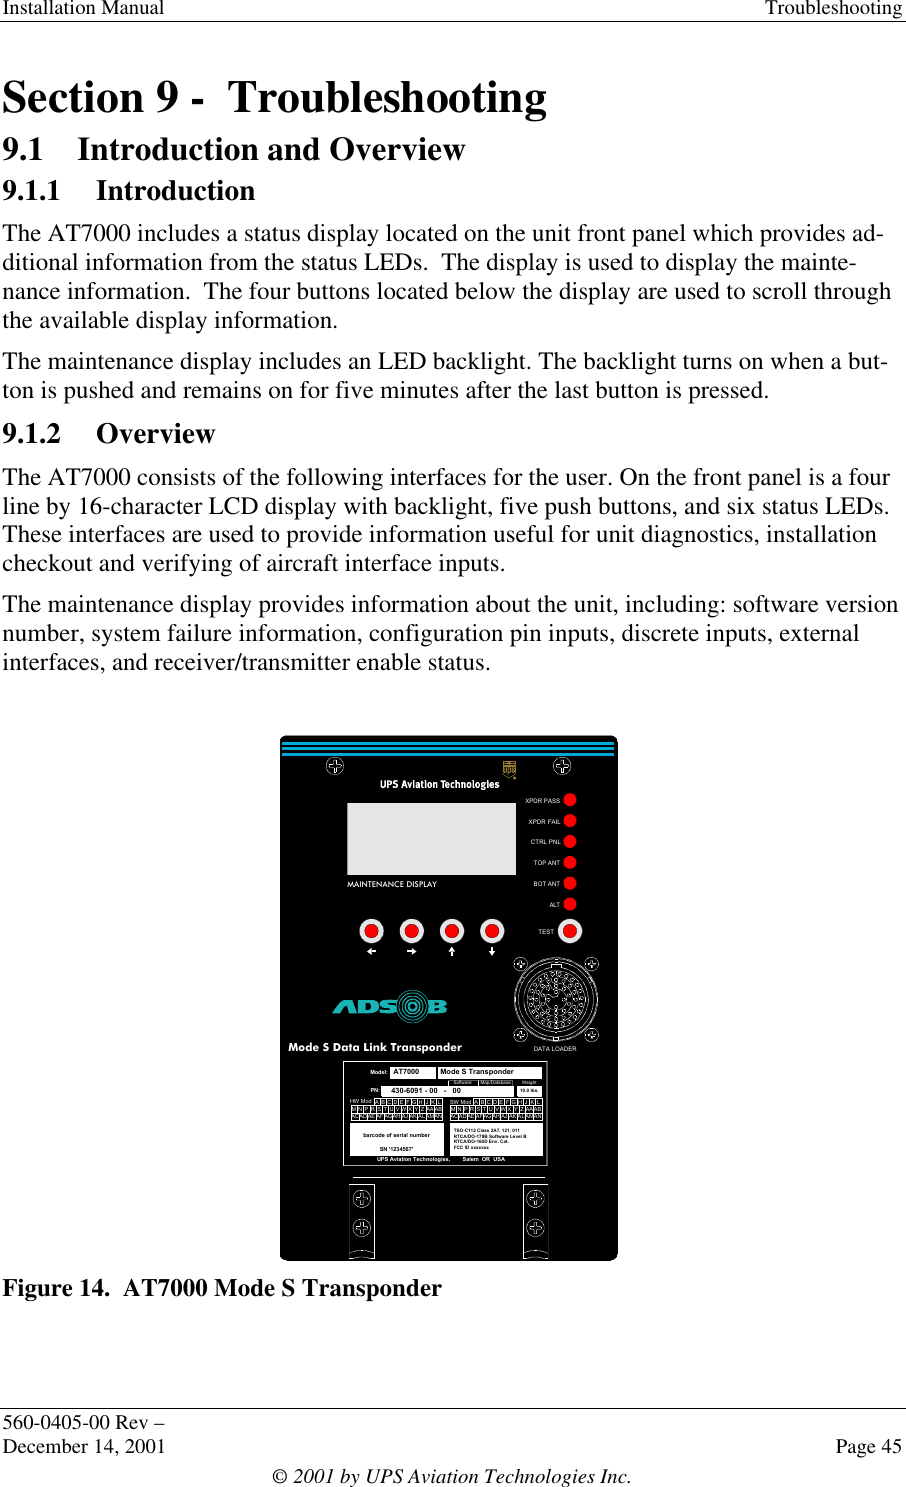 Installation Manual Troubleshooting560-0405-00 Rev –December 14, 2001 Page 45© 2001 by UPS Aviation Technologies Inc.Section 9 -  Troubleshooting9.1 Introduction and Overview9.1.1 IntroductionThe AT7000 includes a status display located on the unit front panel which provides ad-ditional information from the status LEDs.  The display is used to display the mainte-nance information.  The four buttons located below the display are used to scroll throughthe available display information.The maintenance display includes an LED backlight. The backlight turns on when a but-ton is pushed and remains on for five minutes after the last button is pressed.9.1.2 OverviewThe AT7000 consists of the following interfaces for the user. On the front panel is a fourline by 16-character LCD display with backlight, five push buttons, and six status LEDs.These interfaces are used to provide information useful for unit diagnostics, installationcheckout and verifying of aircraft interface inputs.The maintenance display provides information about the unit, including: software versionnumber, system failure information, configuration pin inputs, discrete inputs, externalinterfaces, and receiver/transmitter enable status.Figure 14.  AT7000 Mode S TransponderMAINTENANCE DISPLAYXPDR PASSXPDR FAILCTRL PNLALTTOP ANTBOT ANTTESTDATA LOADERAT7000Mode S Data Link Transponderbarcode of serial numberSN &apos;1234567&apos;UPS Aviation Technologies,        Salem  OR  USAModel:AT7000PN:   430-6091 - 00   -   00SW ModTSO-C112 Class 2A7, 121, 011RTCA/DO-178B Software Level BRTCA/DO-160D Env. Cat.FCC ID xxxxxxx Mode S TransponderCAADEABACBAFGHJKLZYXWVUTSRPNMADAEAFAGAHAJAKALAMANHW ModCAADEABACBA FGHJKLZYXWVUTSRPNMADAEAFAGAHAJAKALAMANSoftwareMap/DatabaseWeight10.0 lbs.